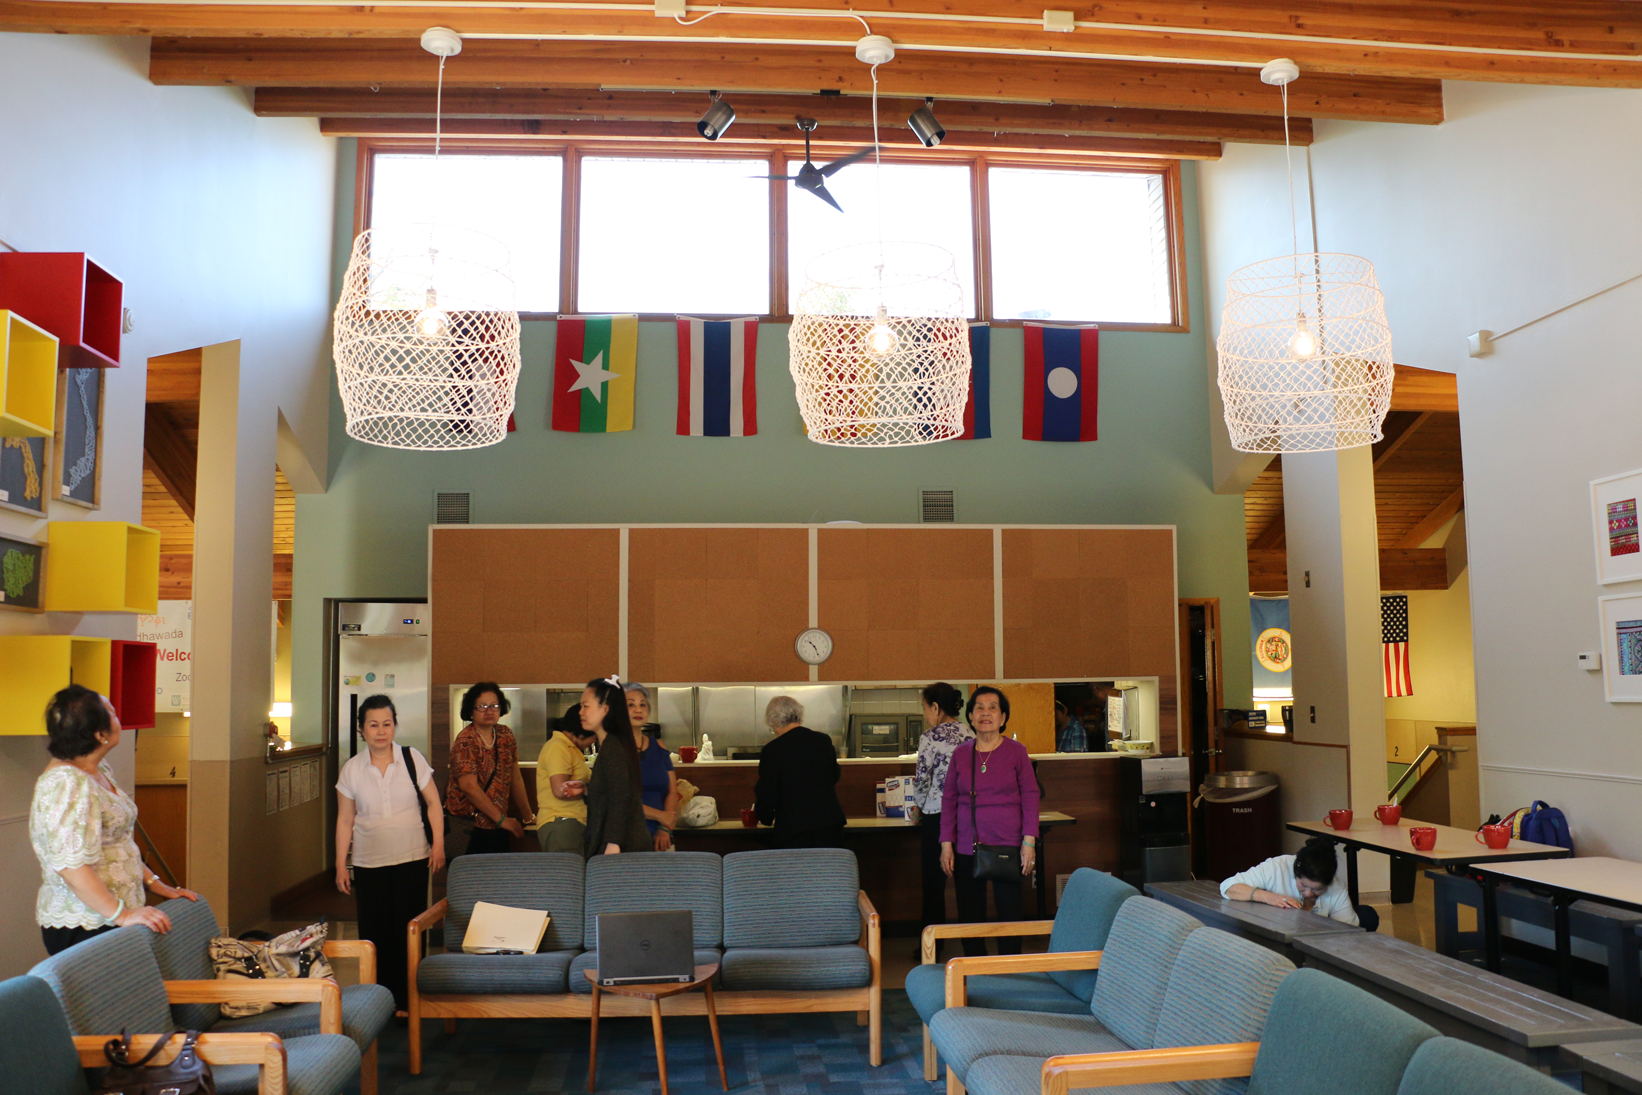 The Center for Social Healing and Wellness is located in the Frogtown neighborhood of Saint Paul, Minnesota and offers a place for Southeast Asian adults to gather for support, fellowship, shared meals and healing